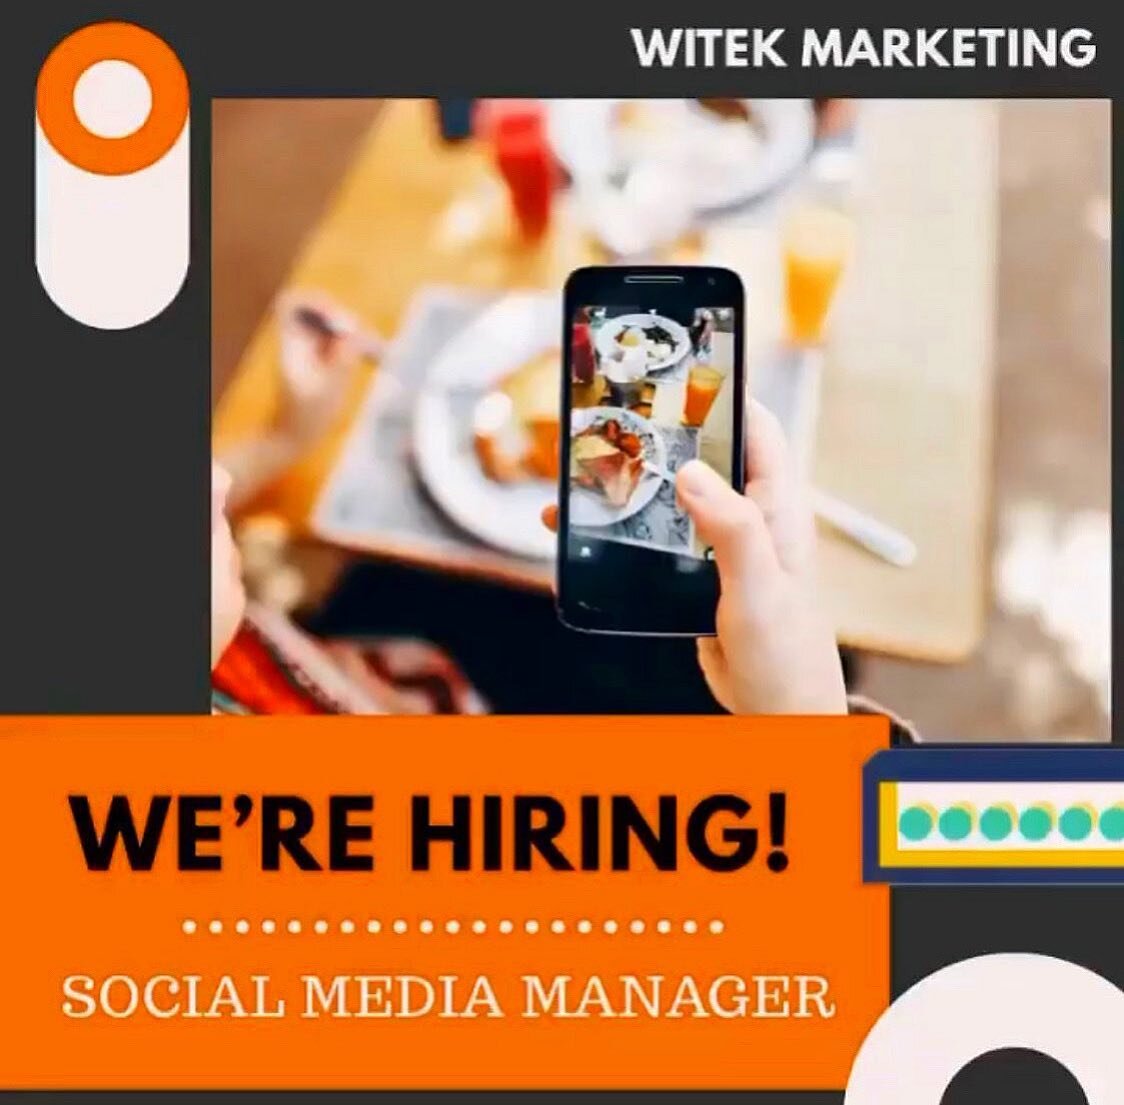 Here we grow again. Do you like to post what you eat? 🍽📷We may have your dream job! 

We&rsquo;re looking for part time Social Media Manager in the Raleigh, Charlotte and Wilmington areas. Requirements: 
✳️Must have strong experience/history with p